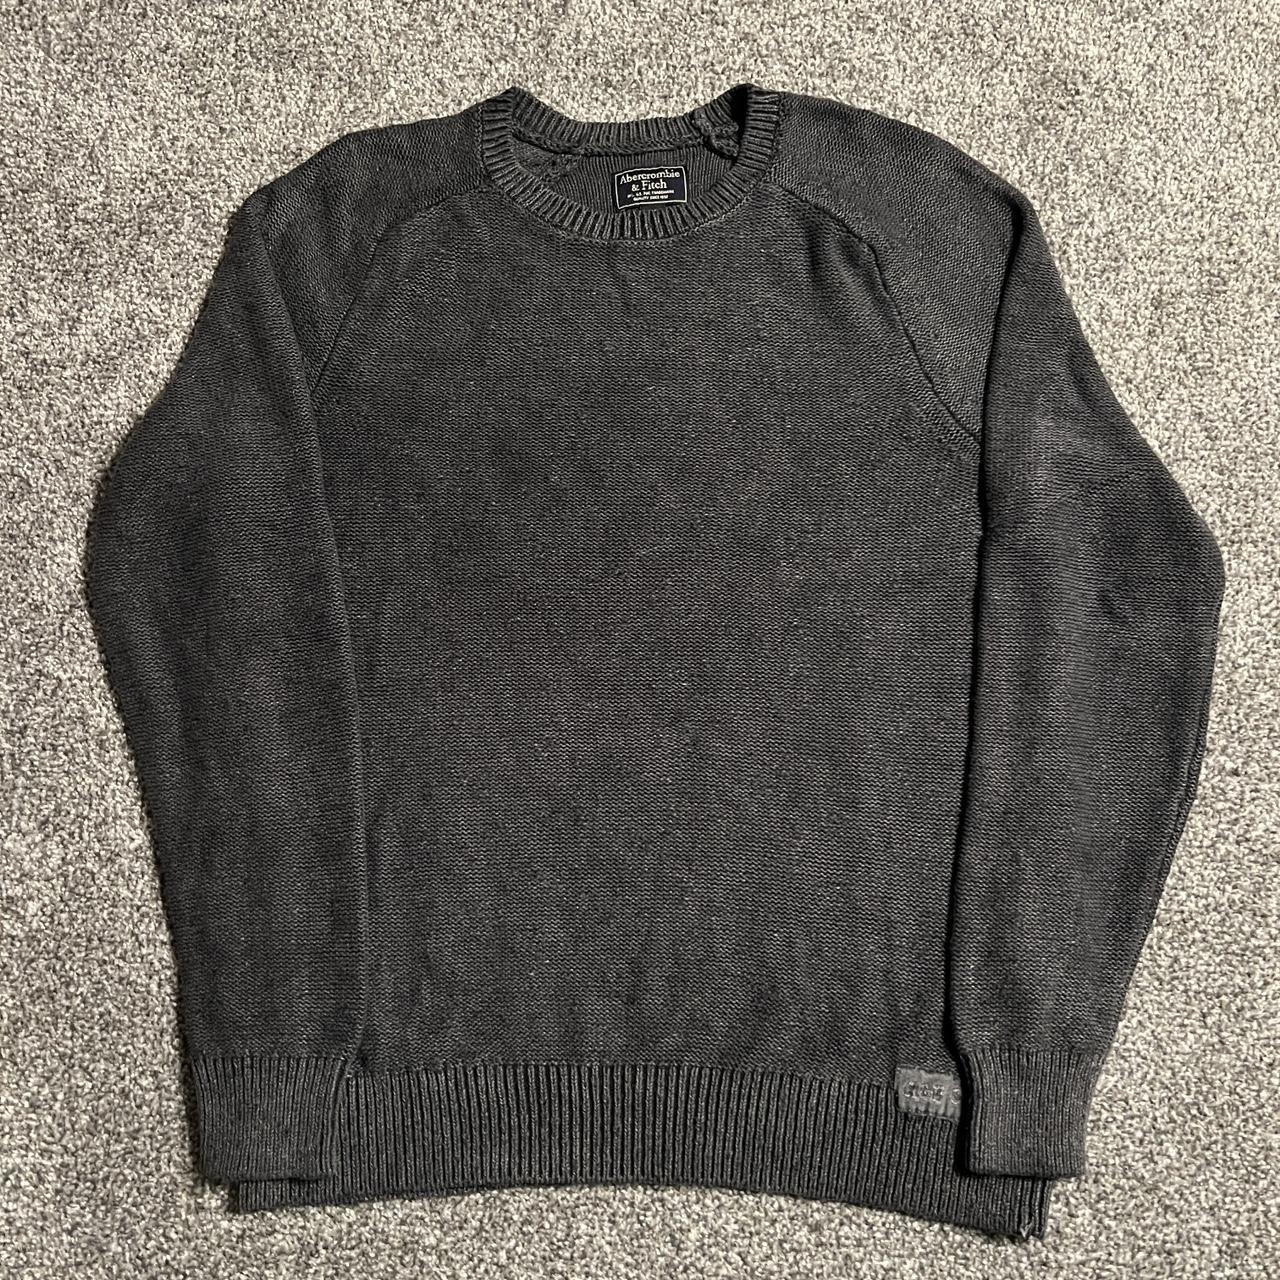 Abercrombie and Fitch Sweater Size: M Width:... - Depop